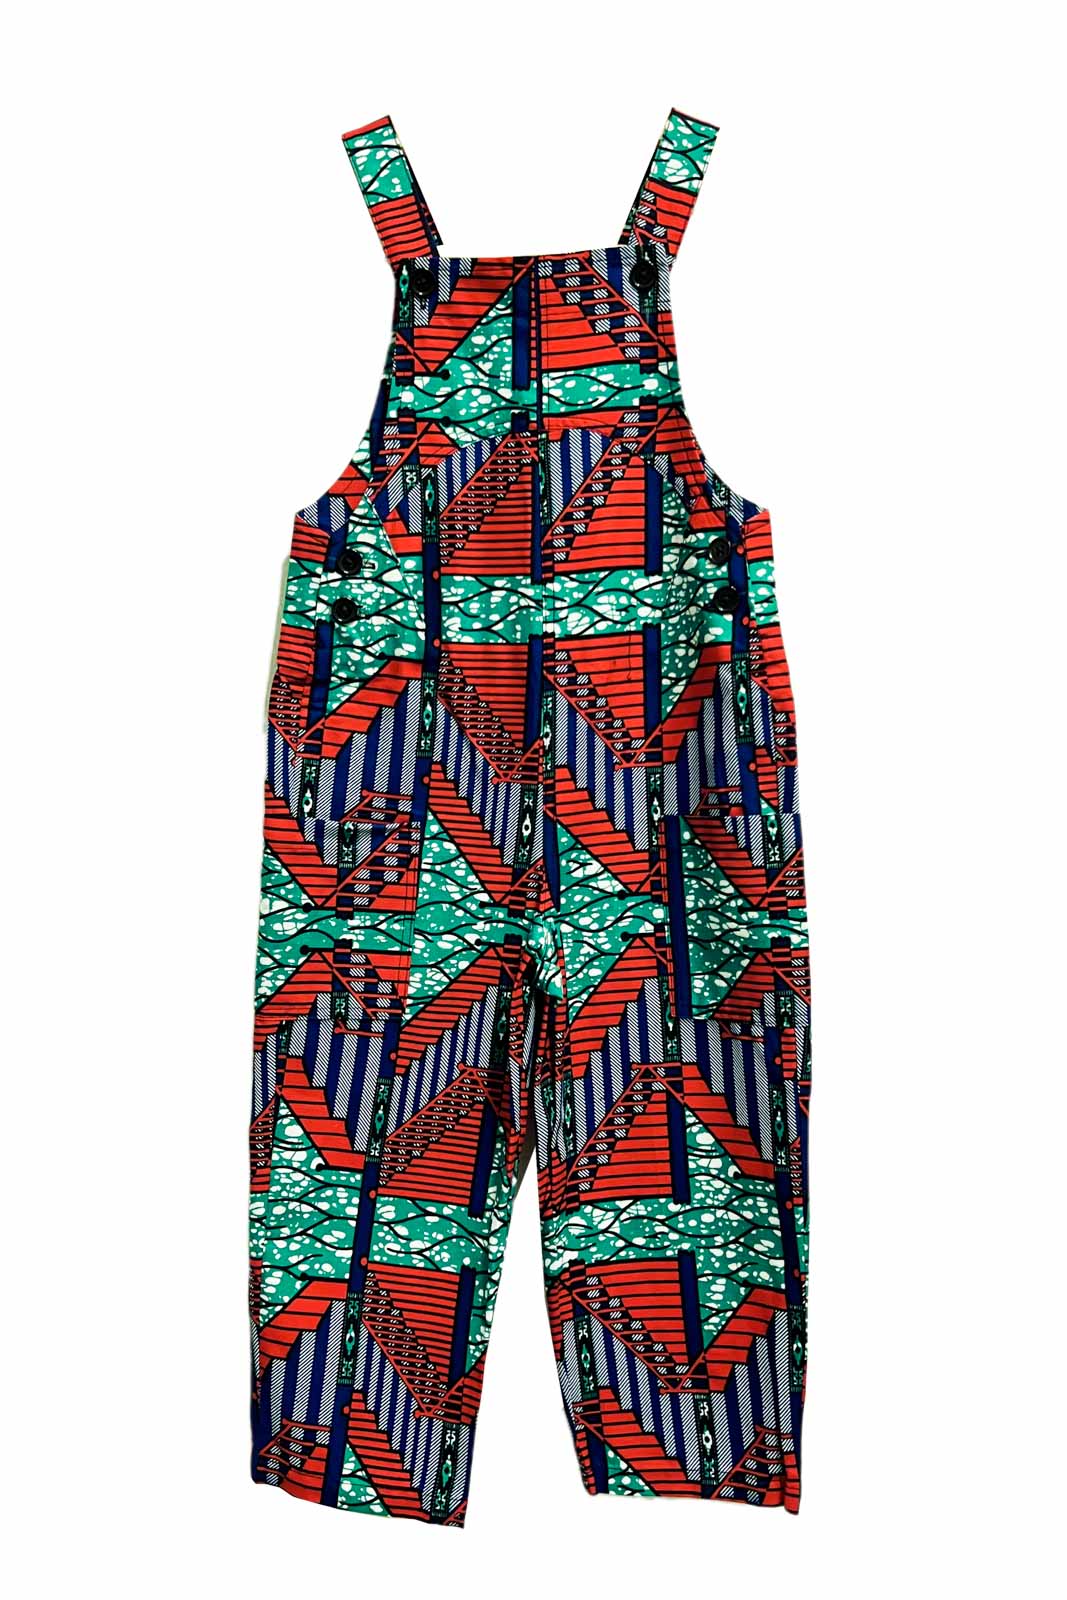 Kyril Unisex Dungarees - Red/Blue Staircase Print